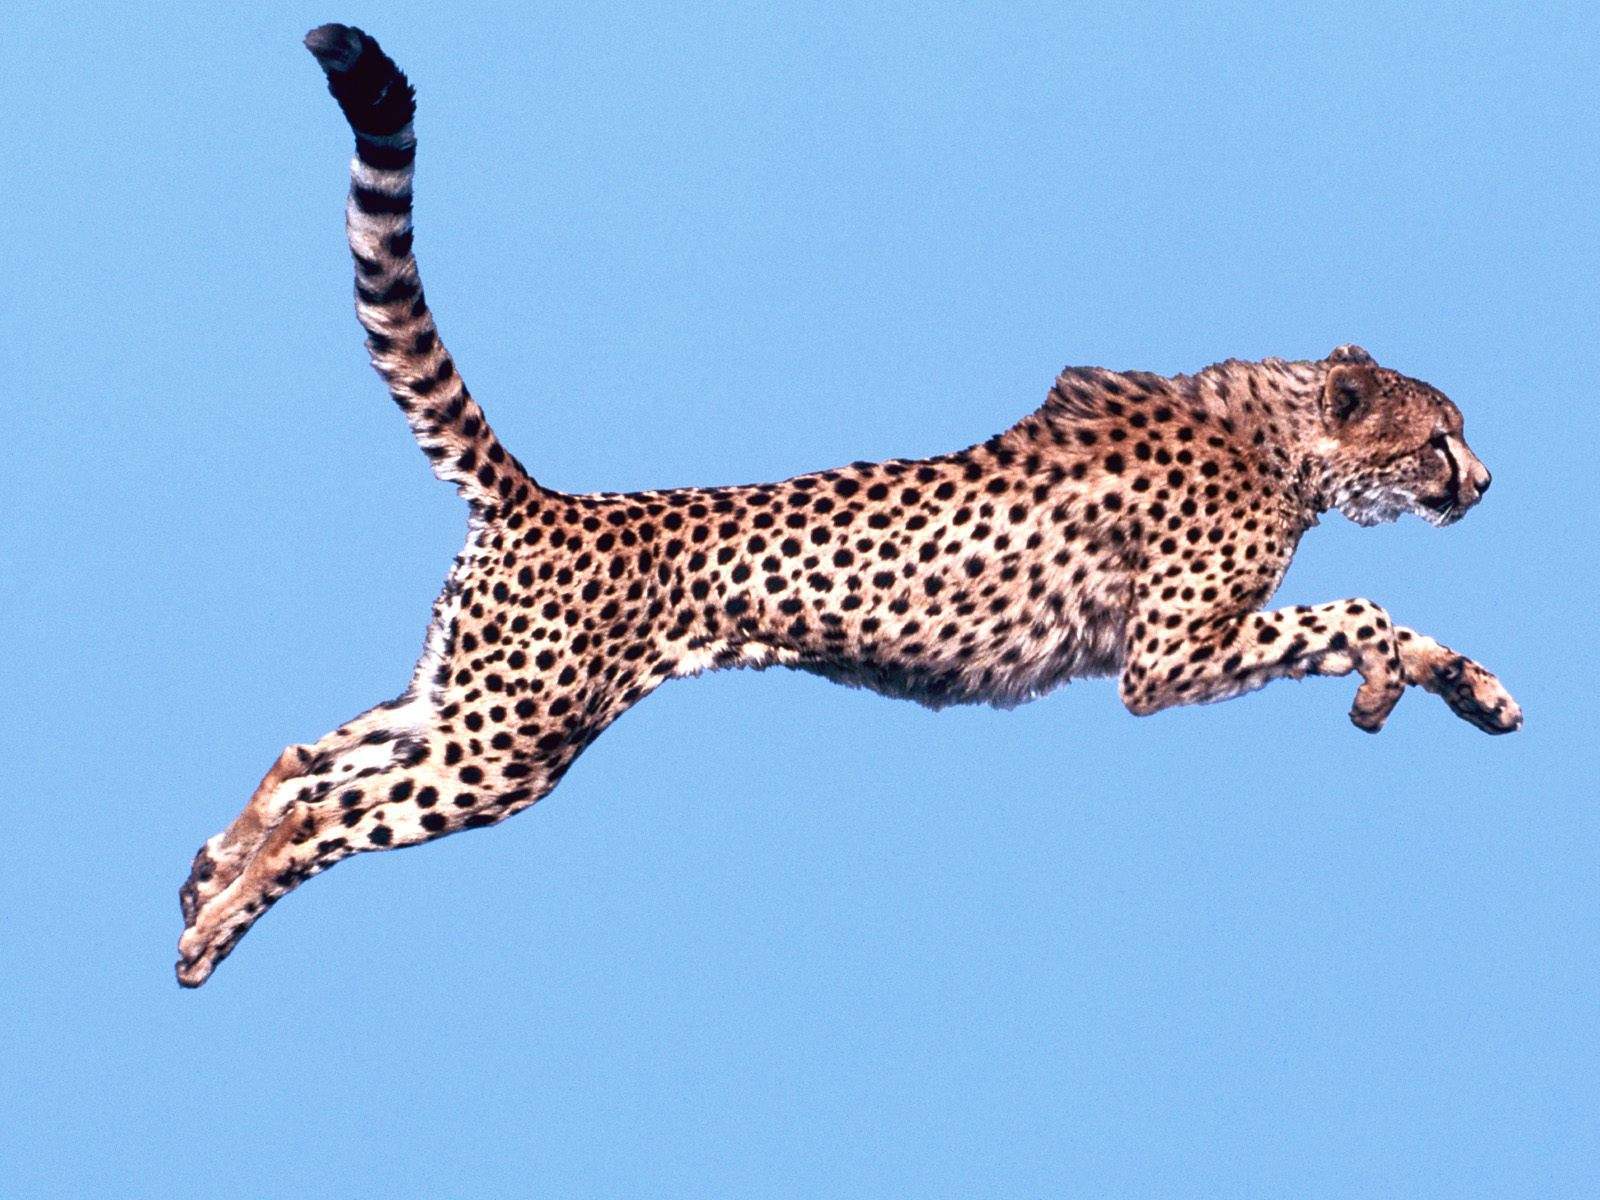 Black and White Wallpapers Air Time Cheetah Wallpaper